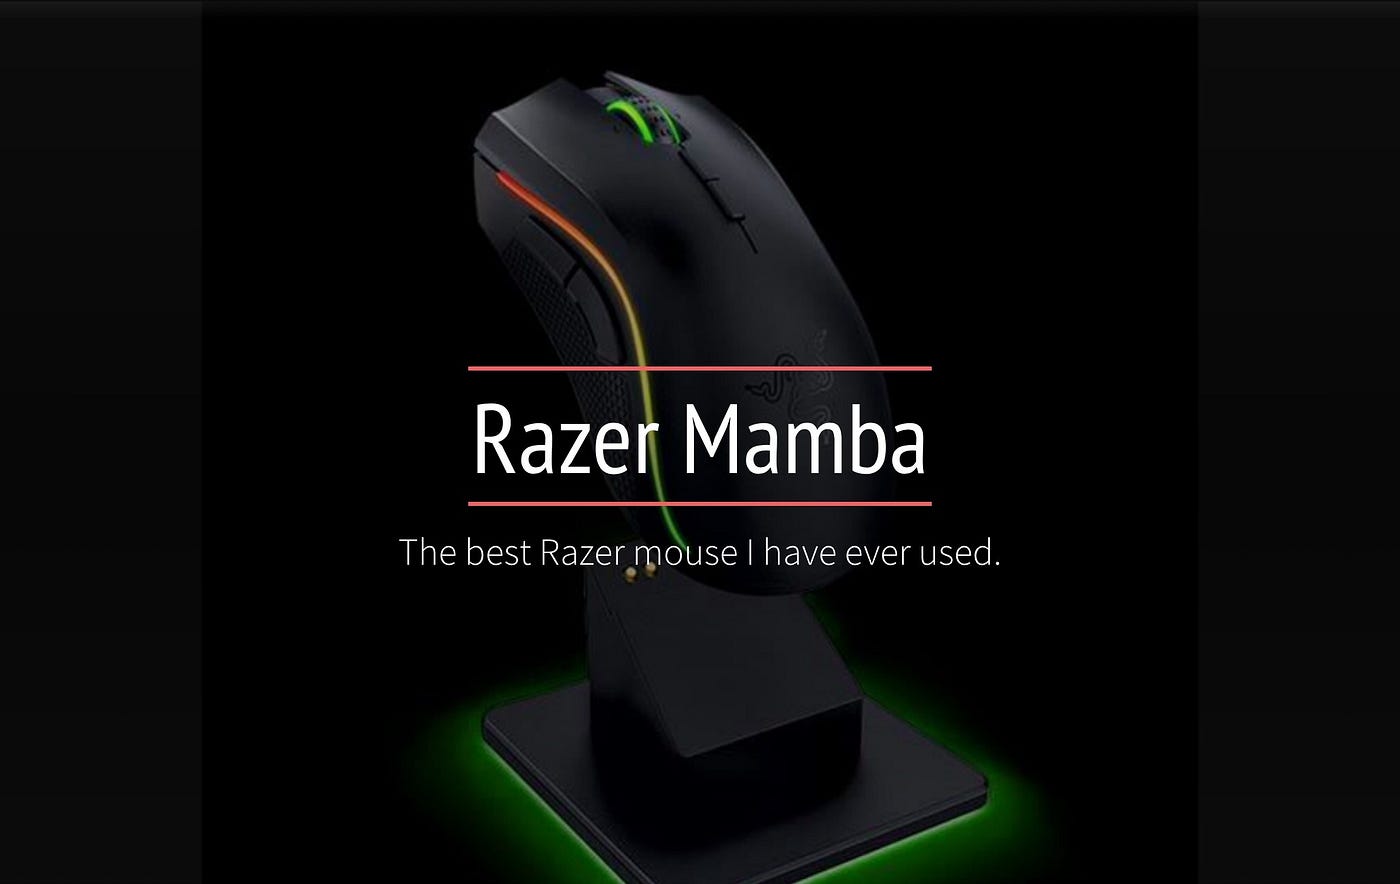 My search for a wireless gaming mouse “Razer Mamba” | by Jimmy Ko | Medium